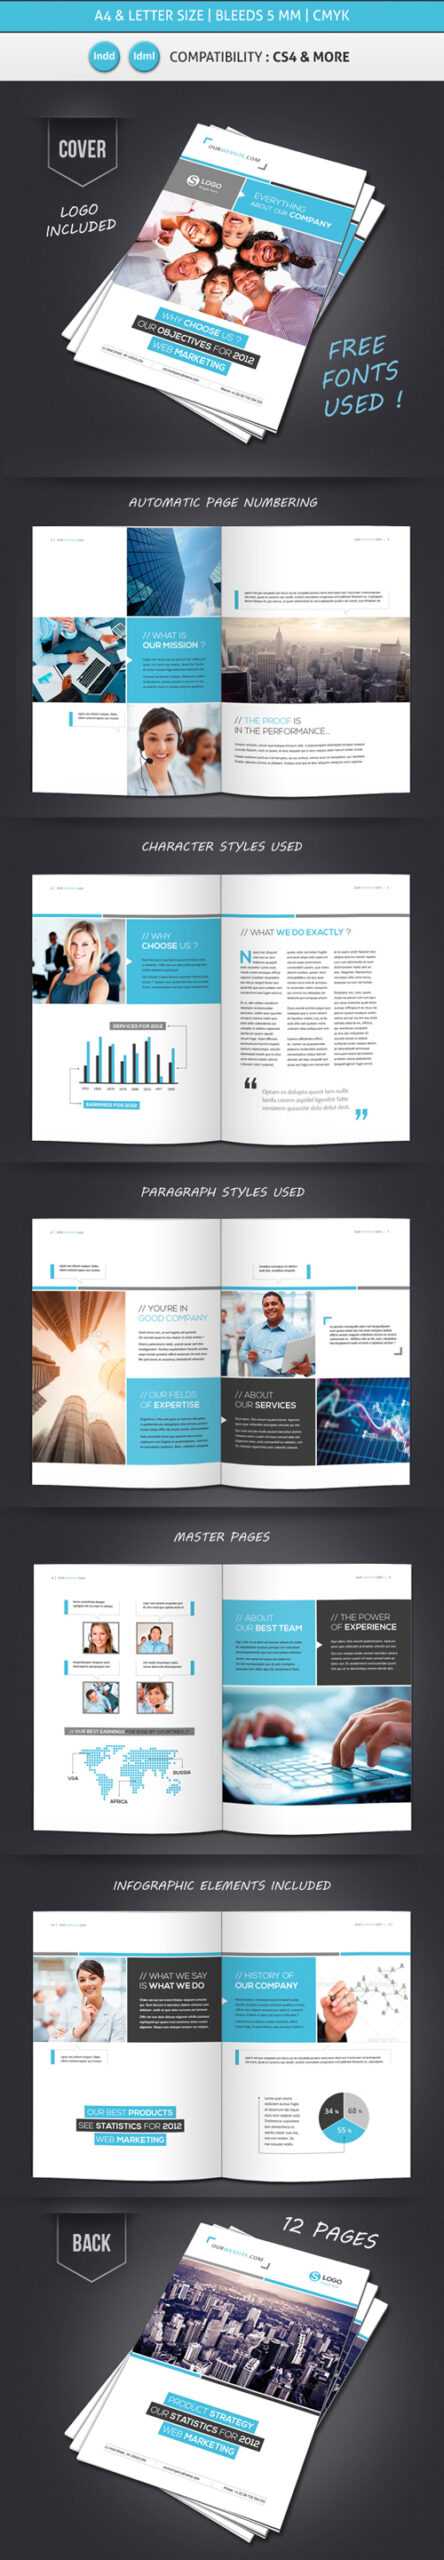 Professional Brochure Designs | Design | Graphic Design Junction With Regard To 12 Page Brochure Template